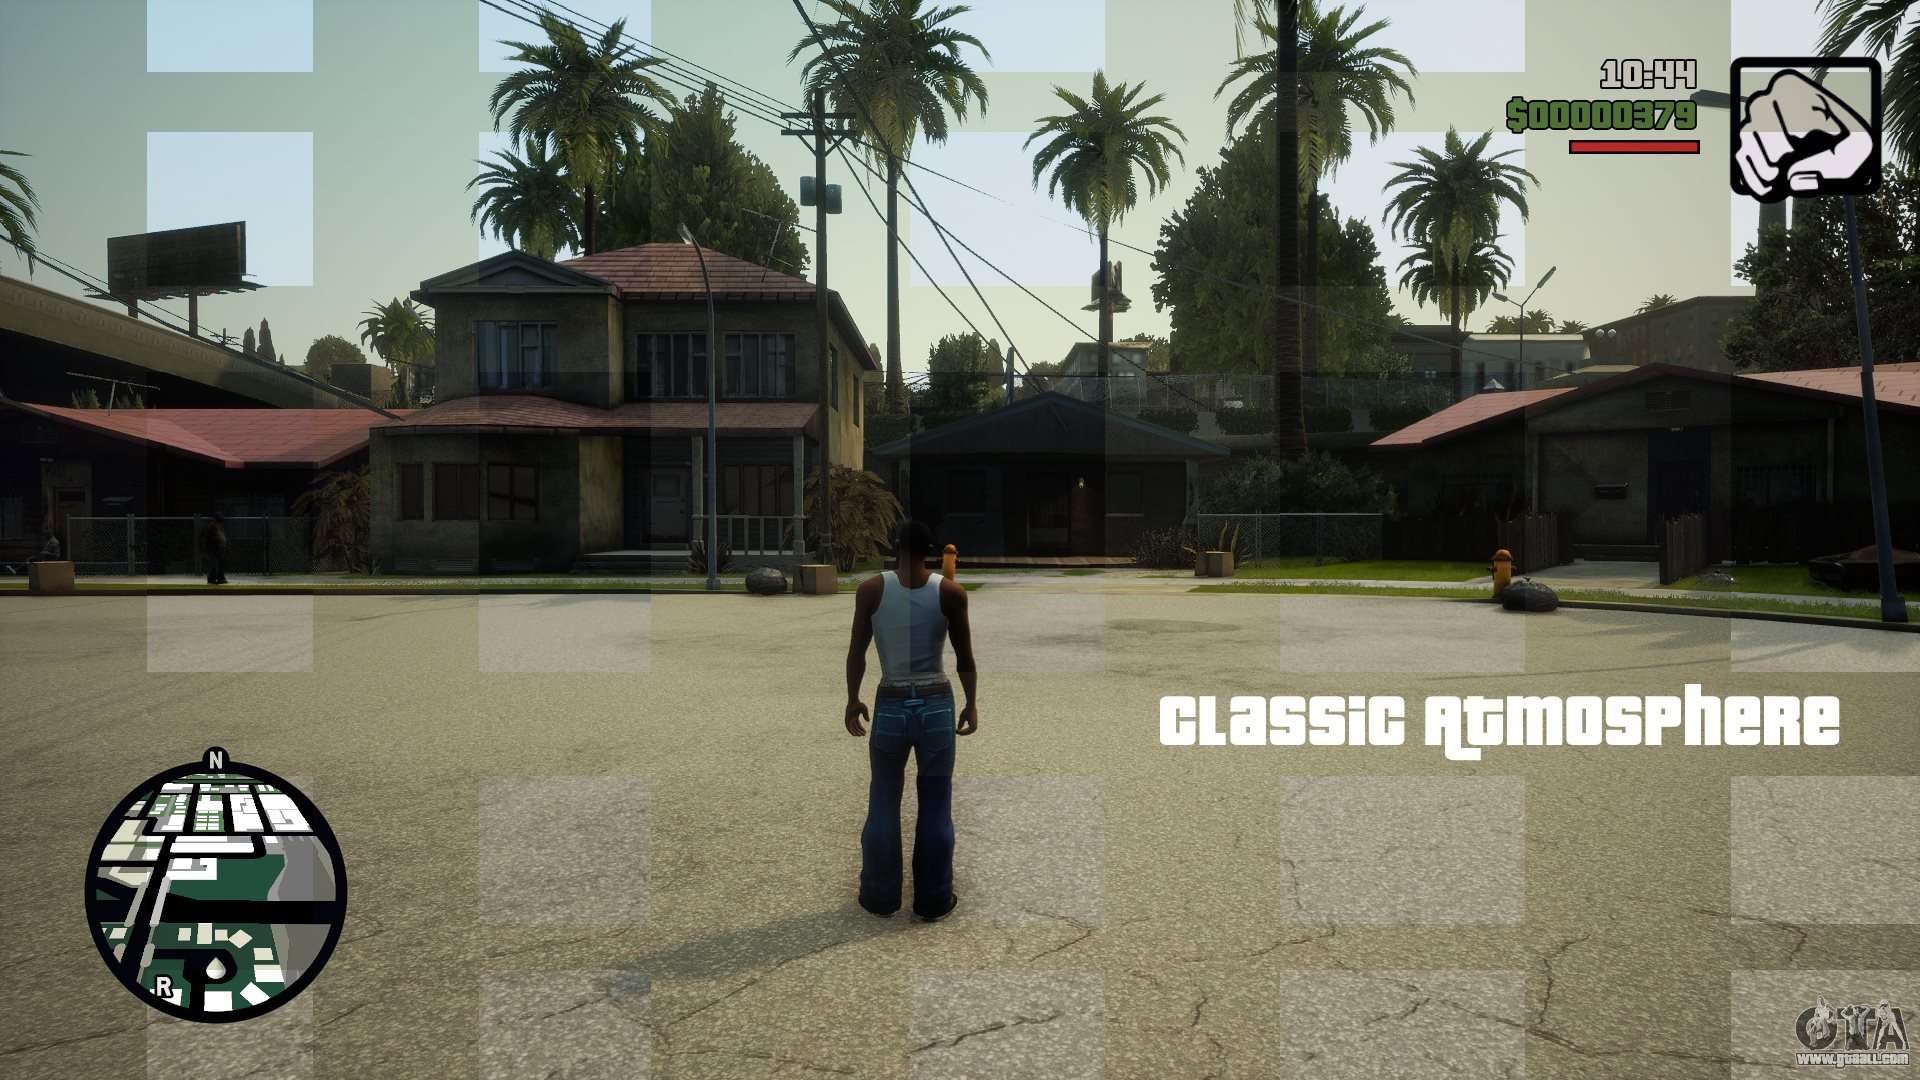 Classic Atmosphere (graphic ReShade) for GTA San Andreas Definitive Edition